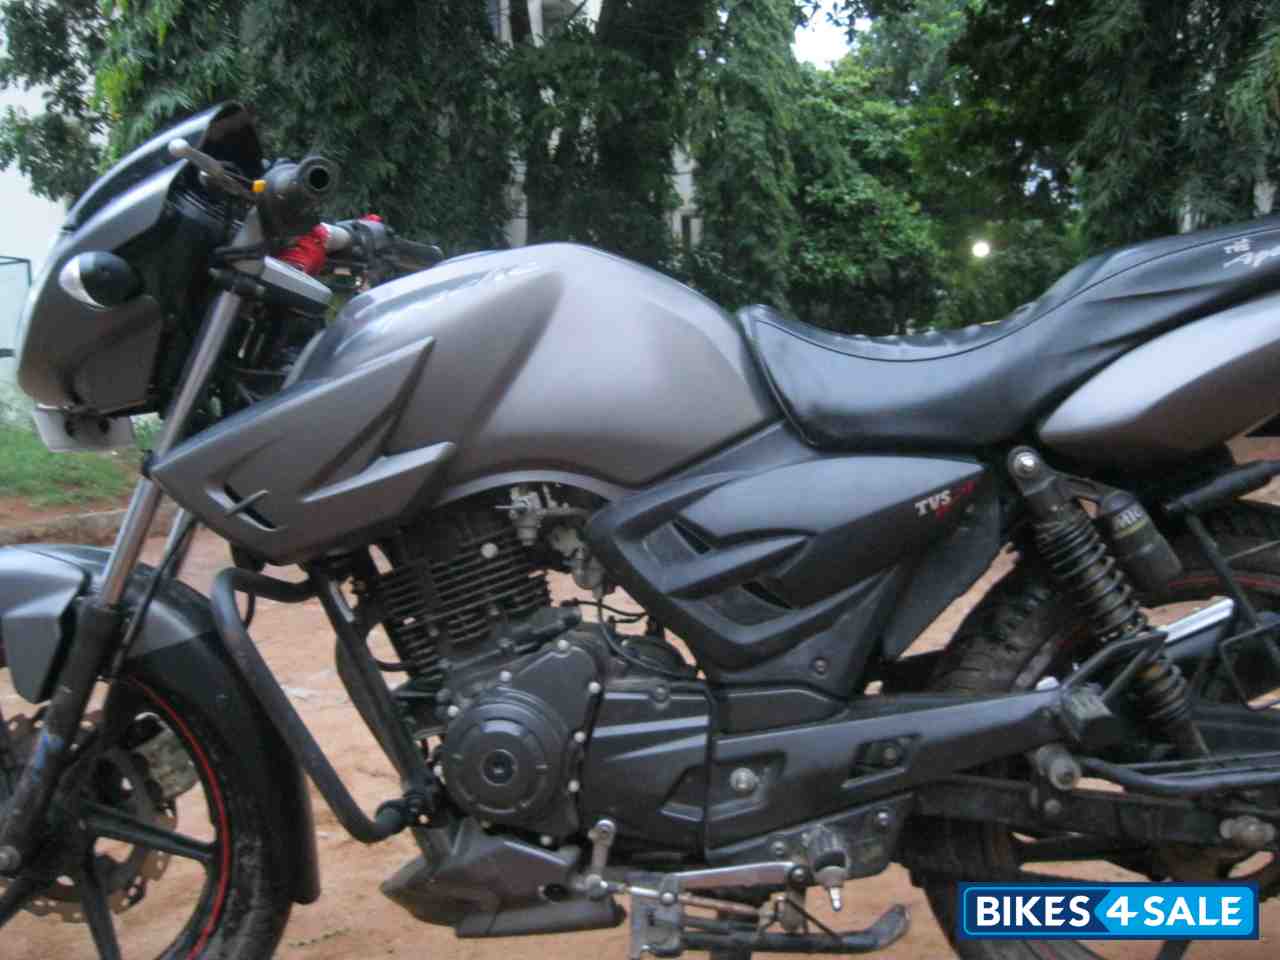 Used 2010 Model Tvs Apache Rtr 160 For Sale In Bangalore Id 114242 Grey Colour Bikes4sale